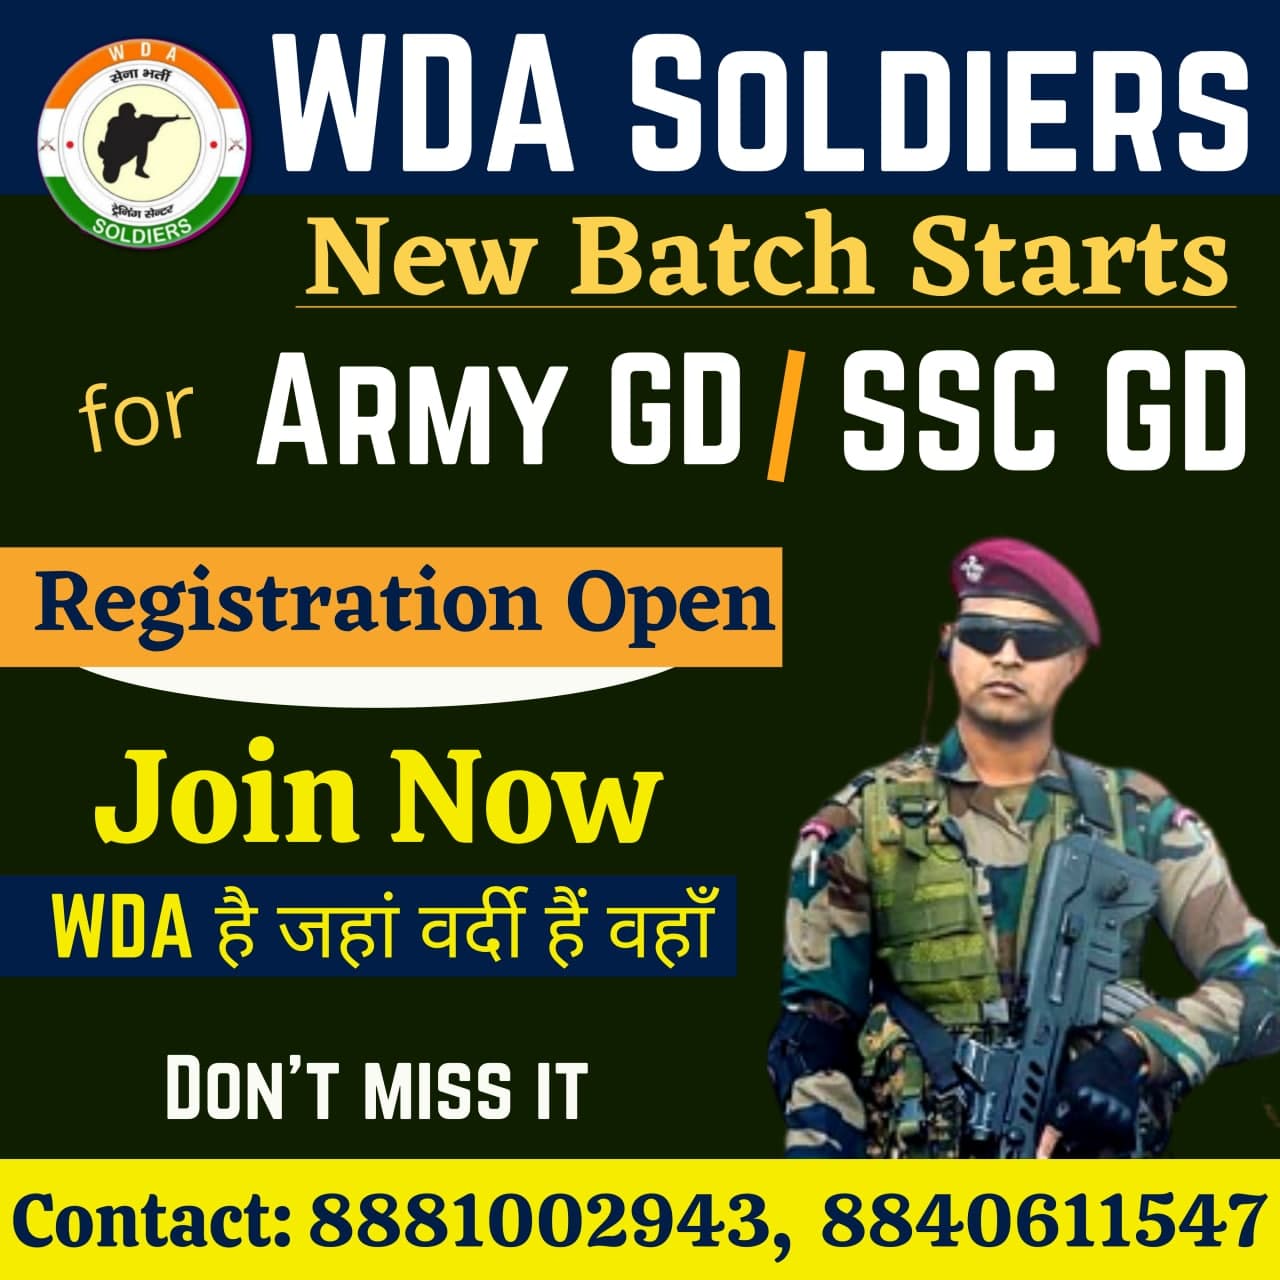 Indian Army GD Eligibility, Age Limit, Height, Chest, Weight, Race